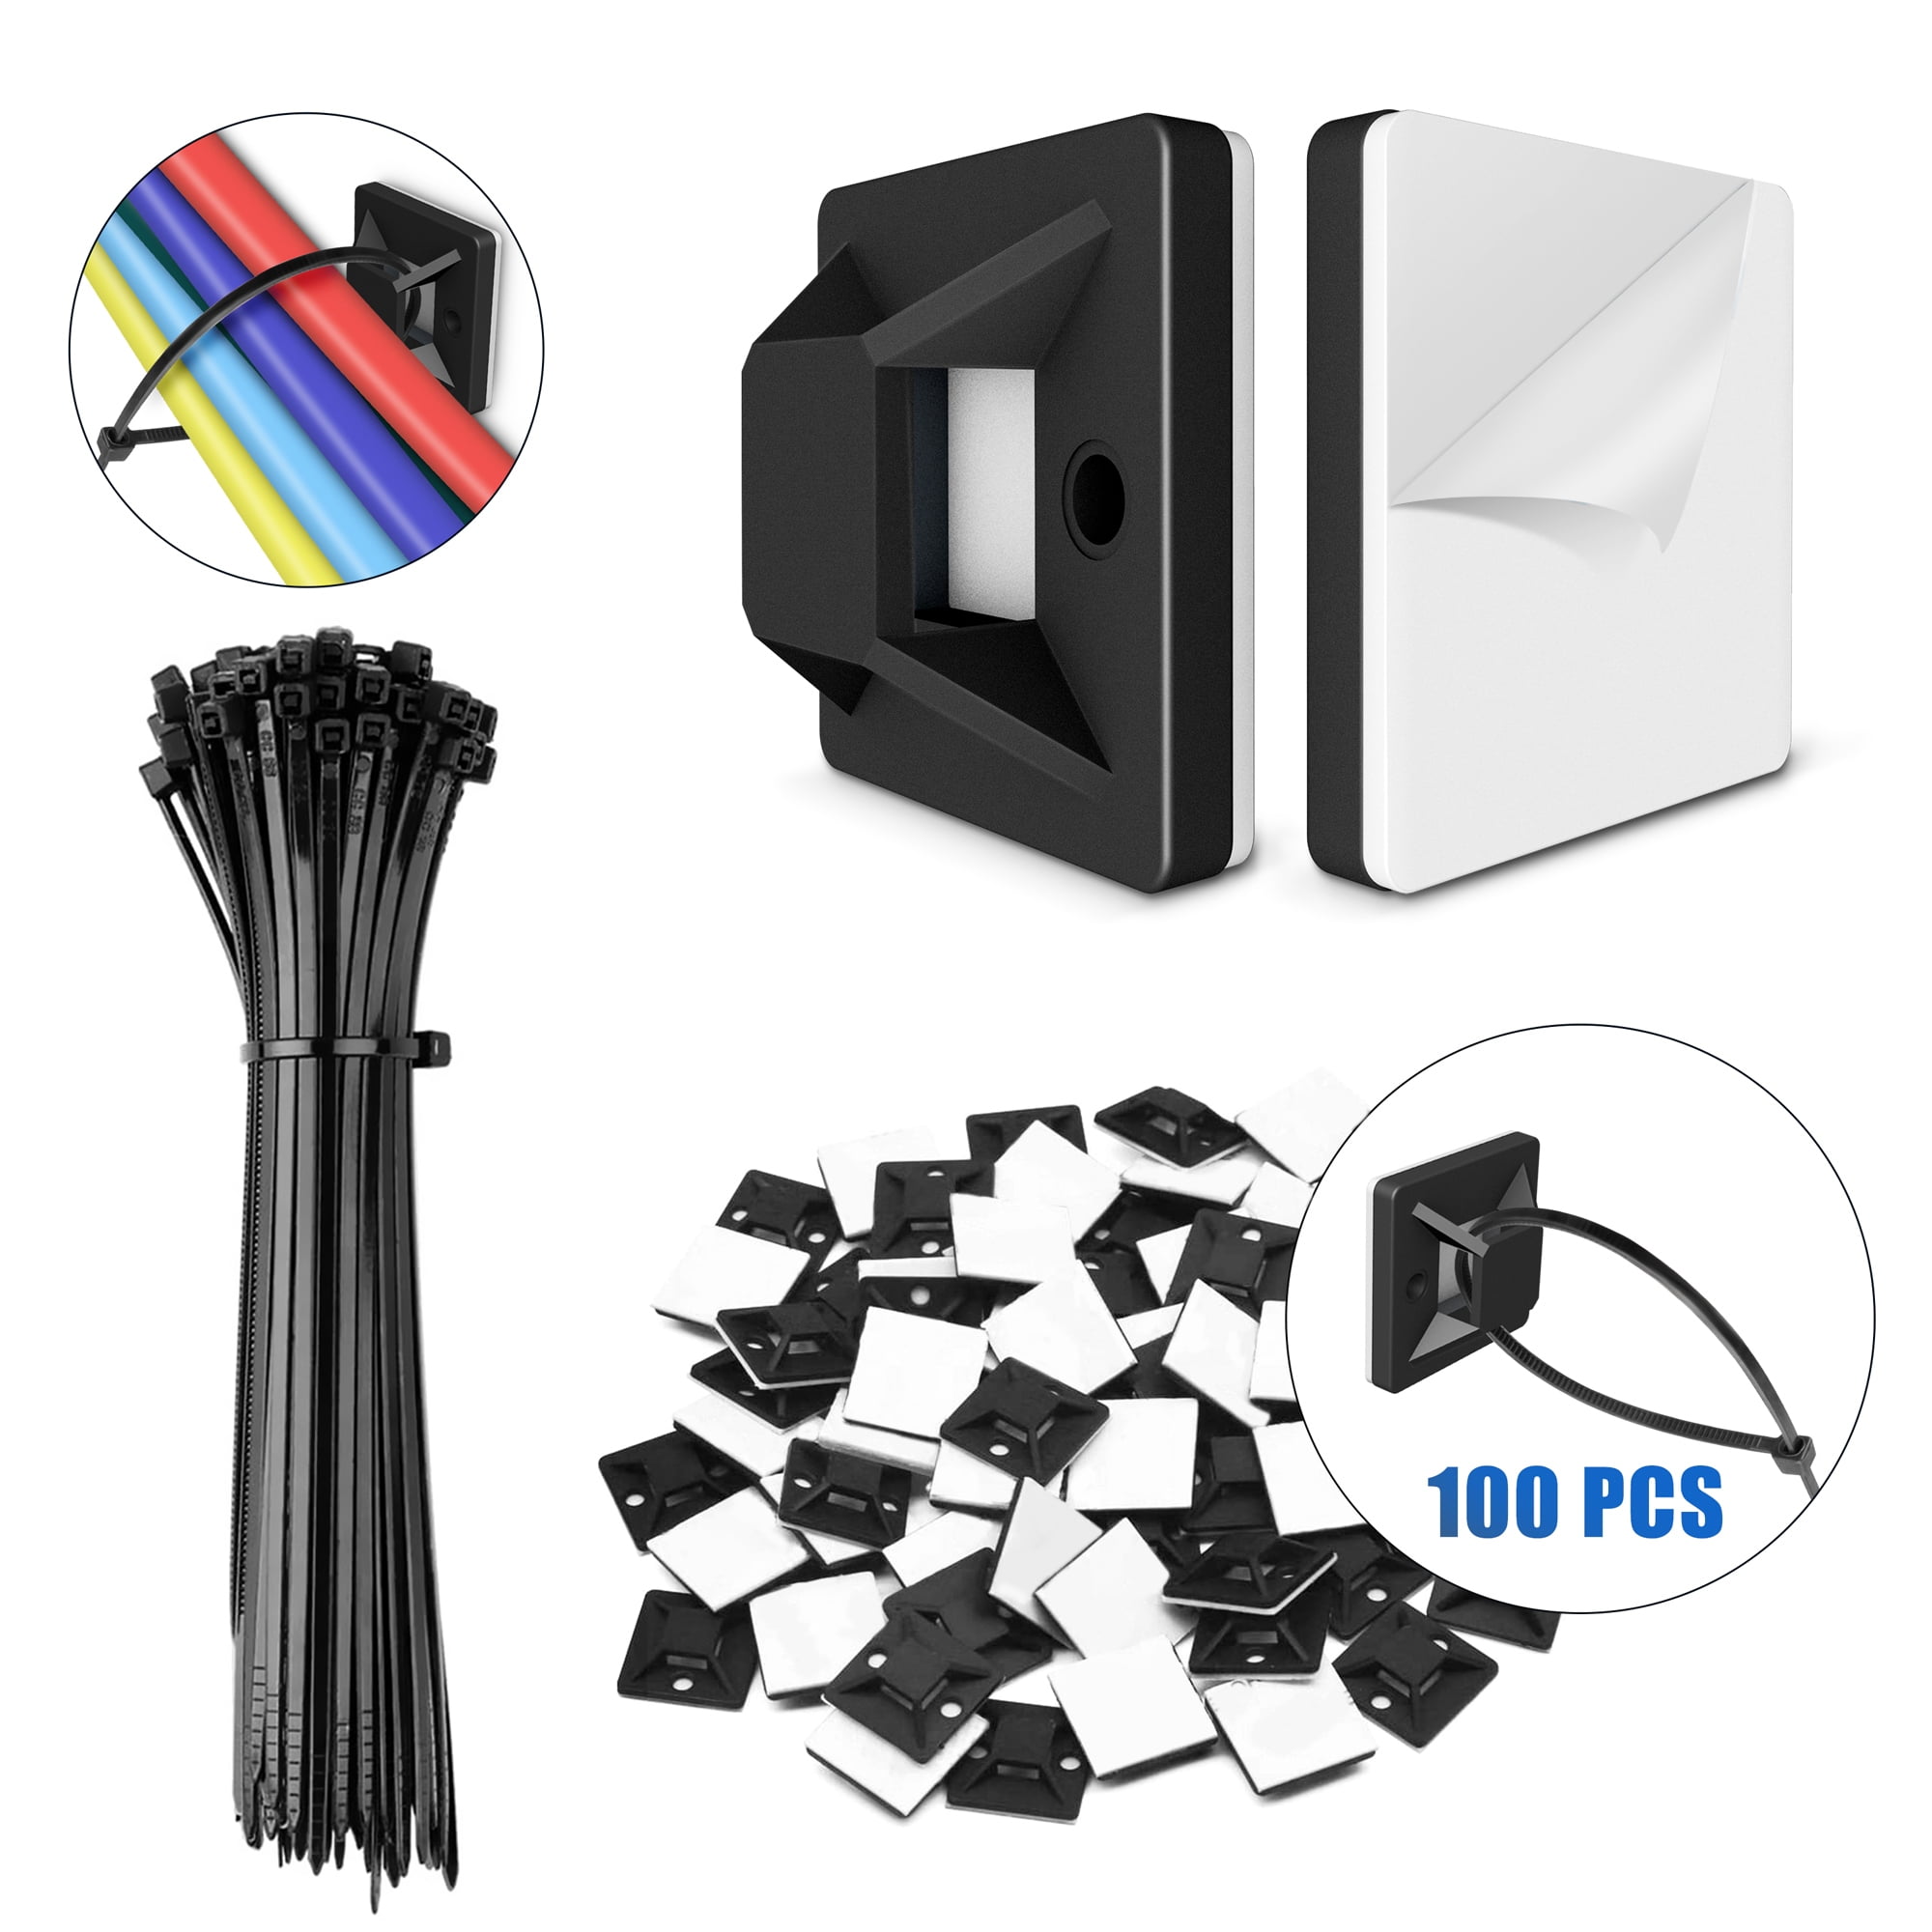 50pcs Self-adhesive Wire Bundle Holder Tie Mount Clip for 10mm